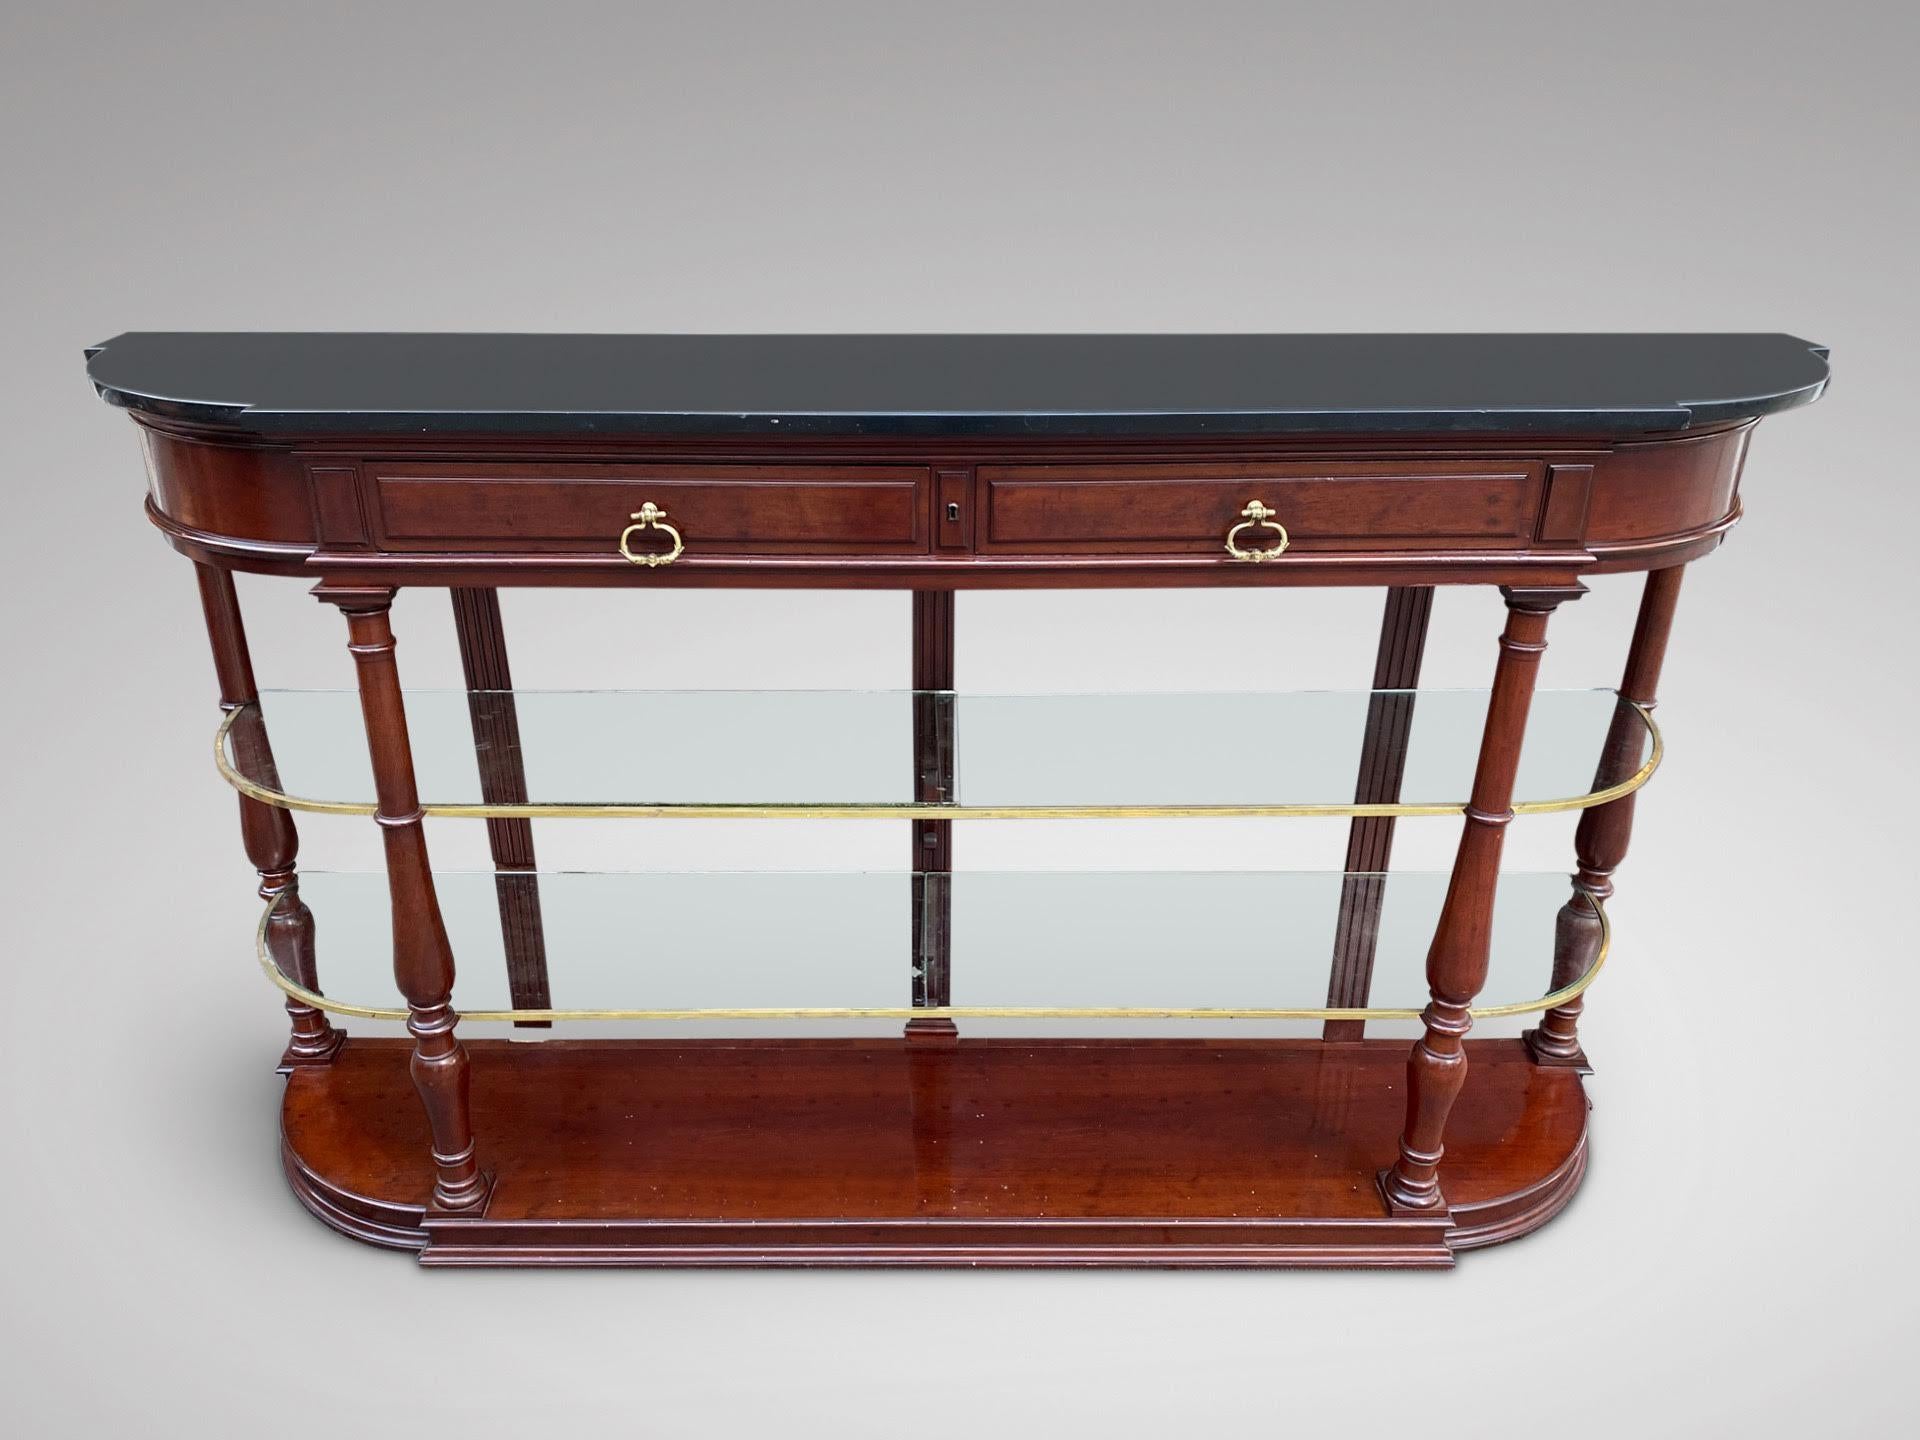 A 19th century French mahogany console table or sideboard with shaped black marble top above a pair of drawers with working lock, two glass shelves with brass fittings, supported by four turned supports, all standing on a plinth base. Great looking